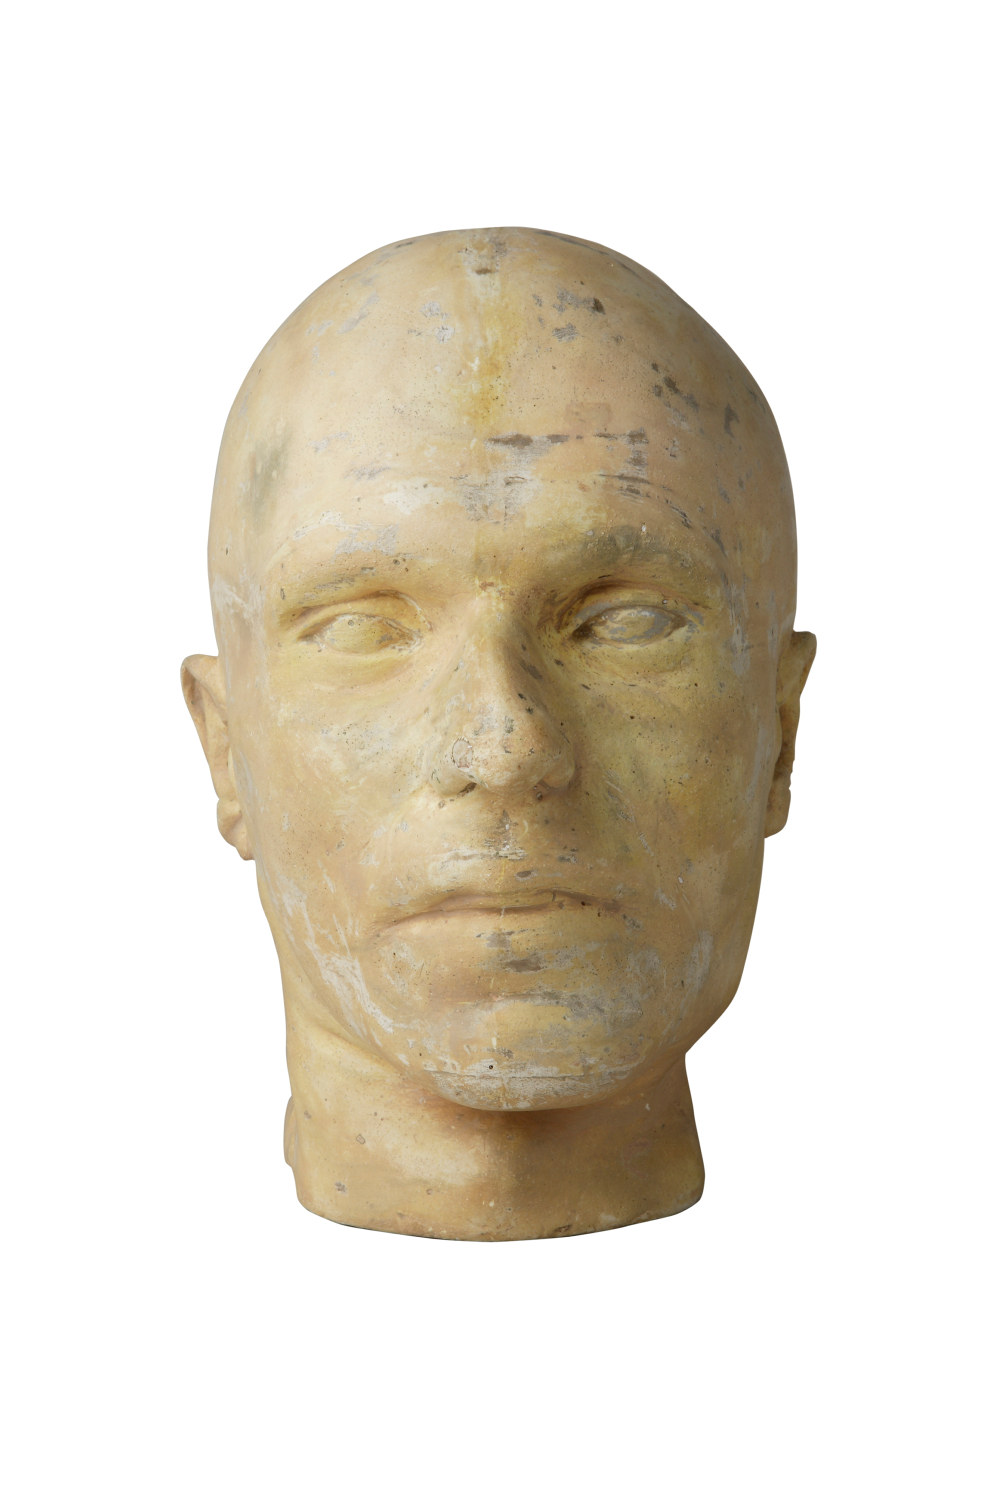 The death mask of bushranger Andrew George Scott, known as Captain Moonlite, is attributed to Walter McGill. It was made shortly after his execution by hanging at Darlinghurst Gaol, in 1880.